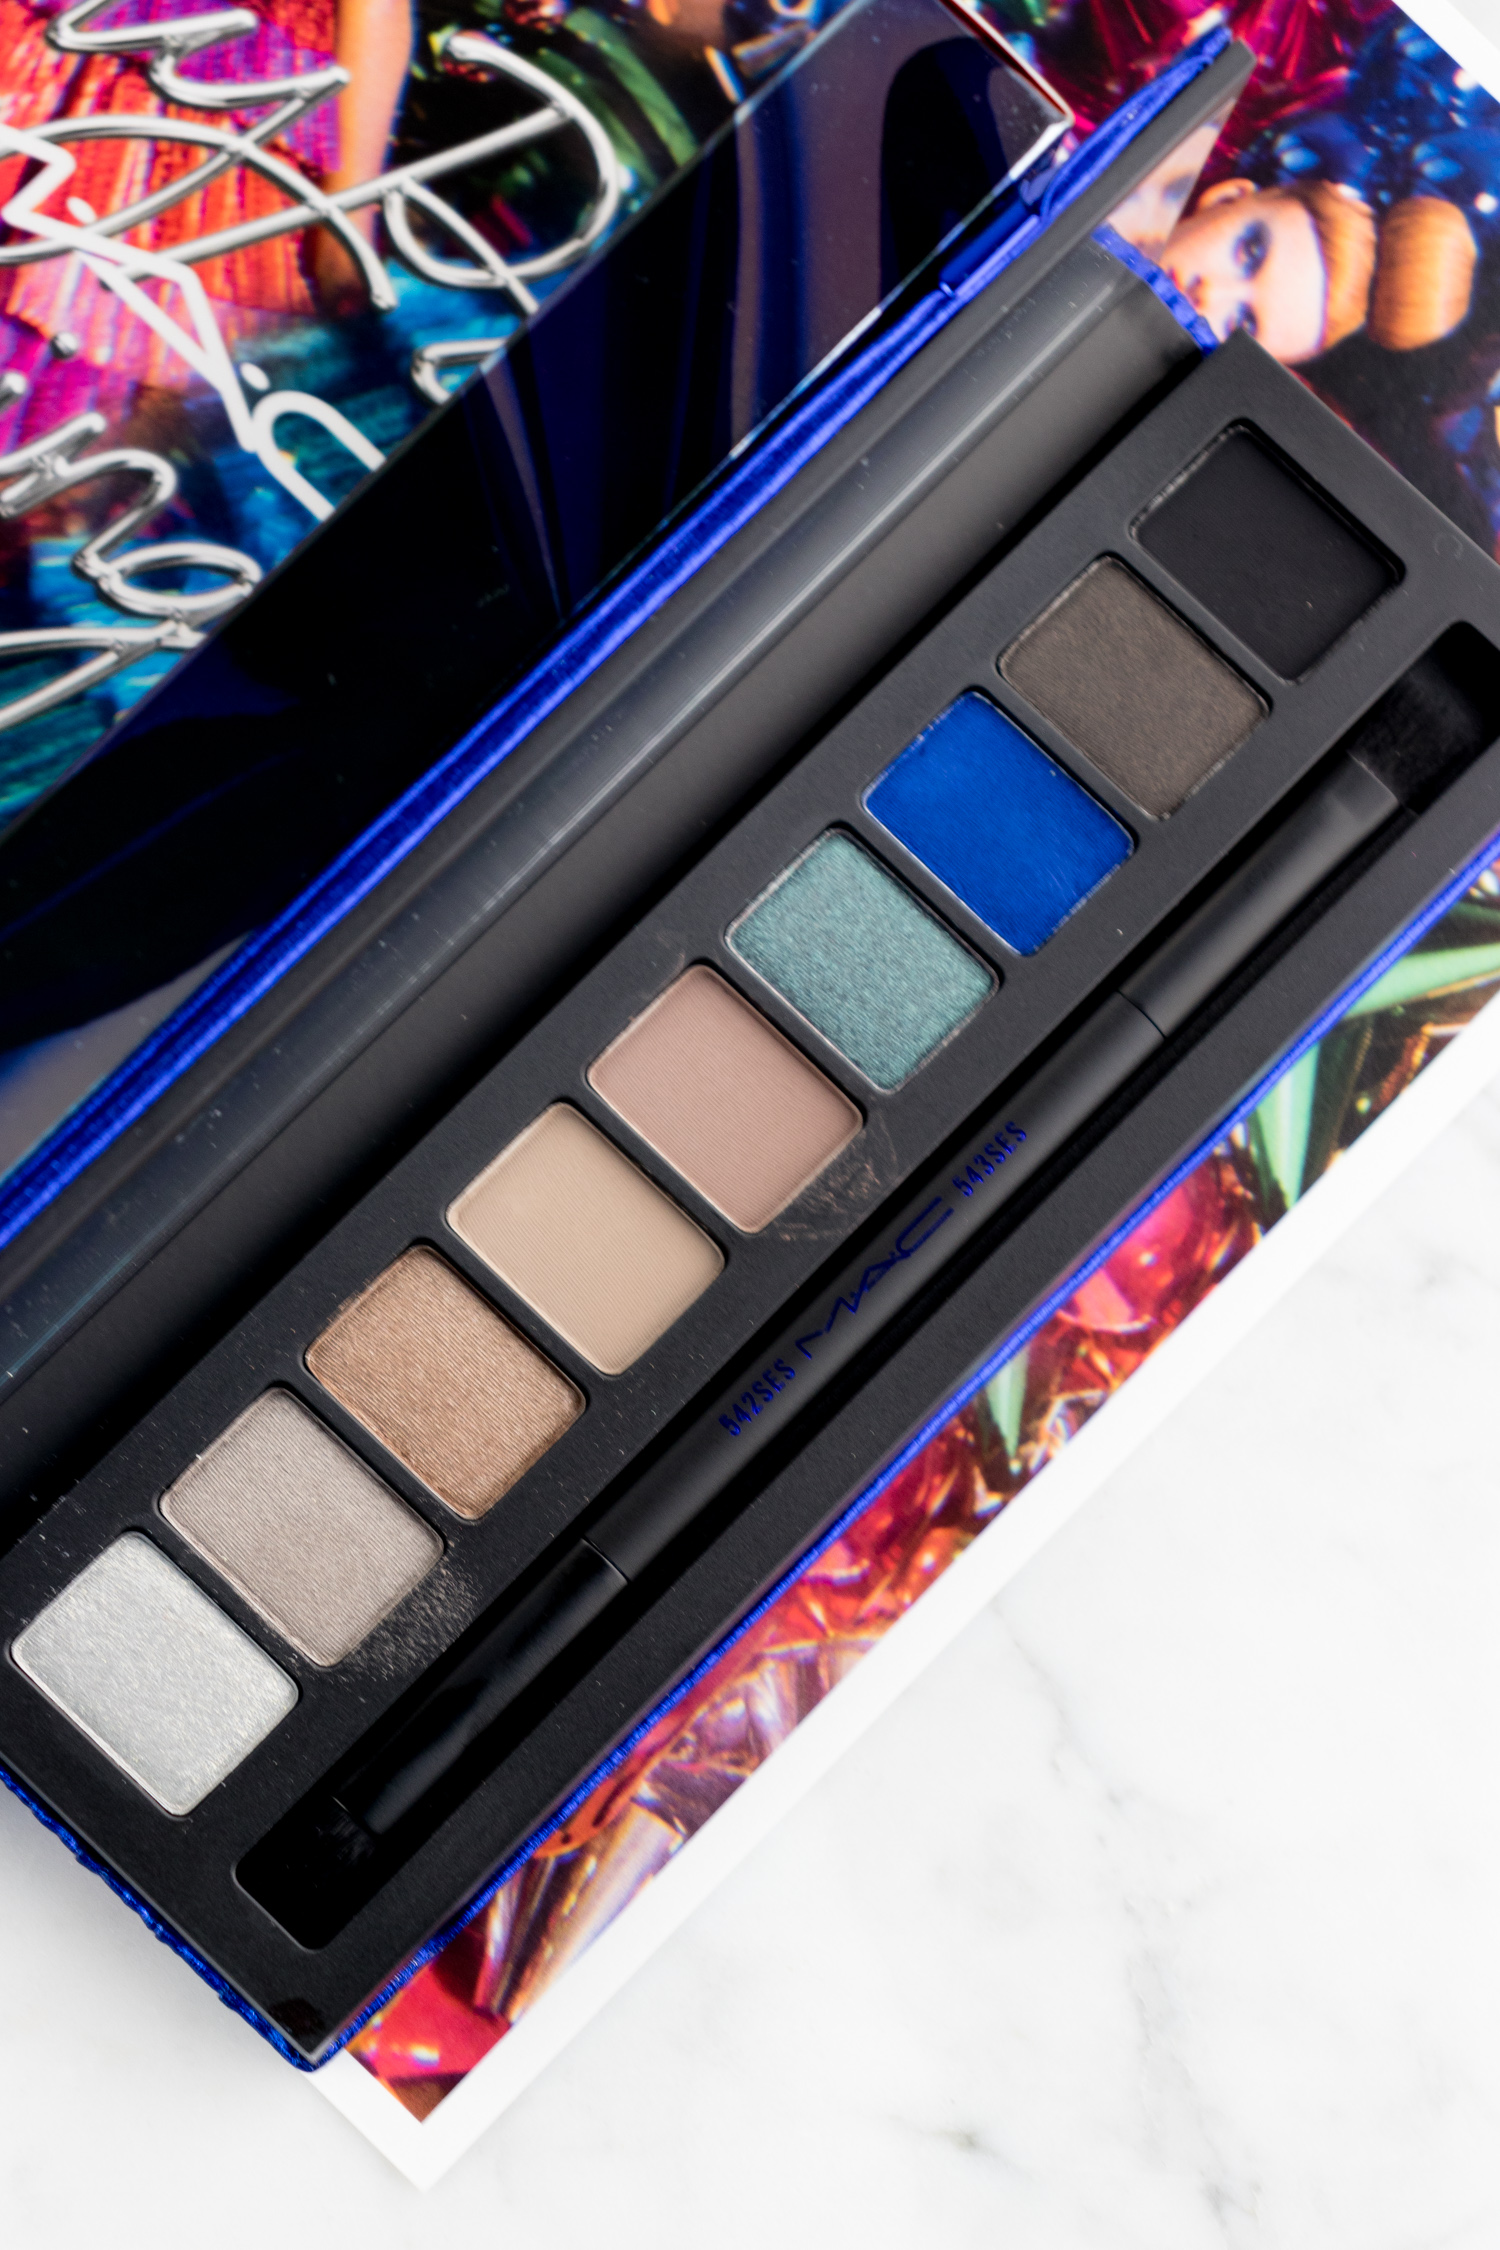 10 Must-Haves from the MAC Shiny Pretty Things Holiday Makeup